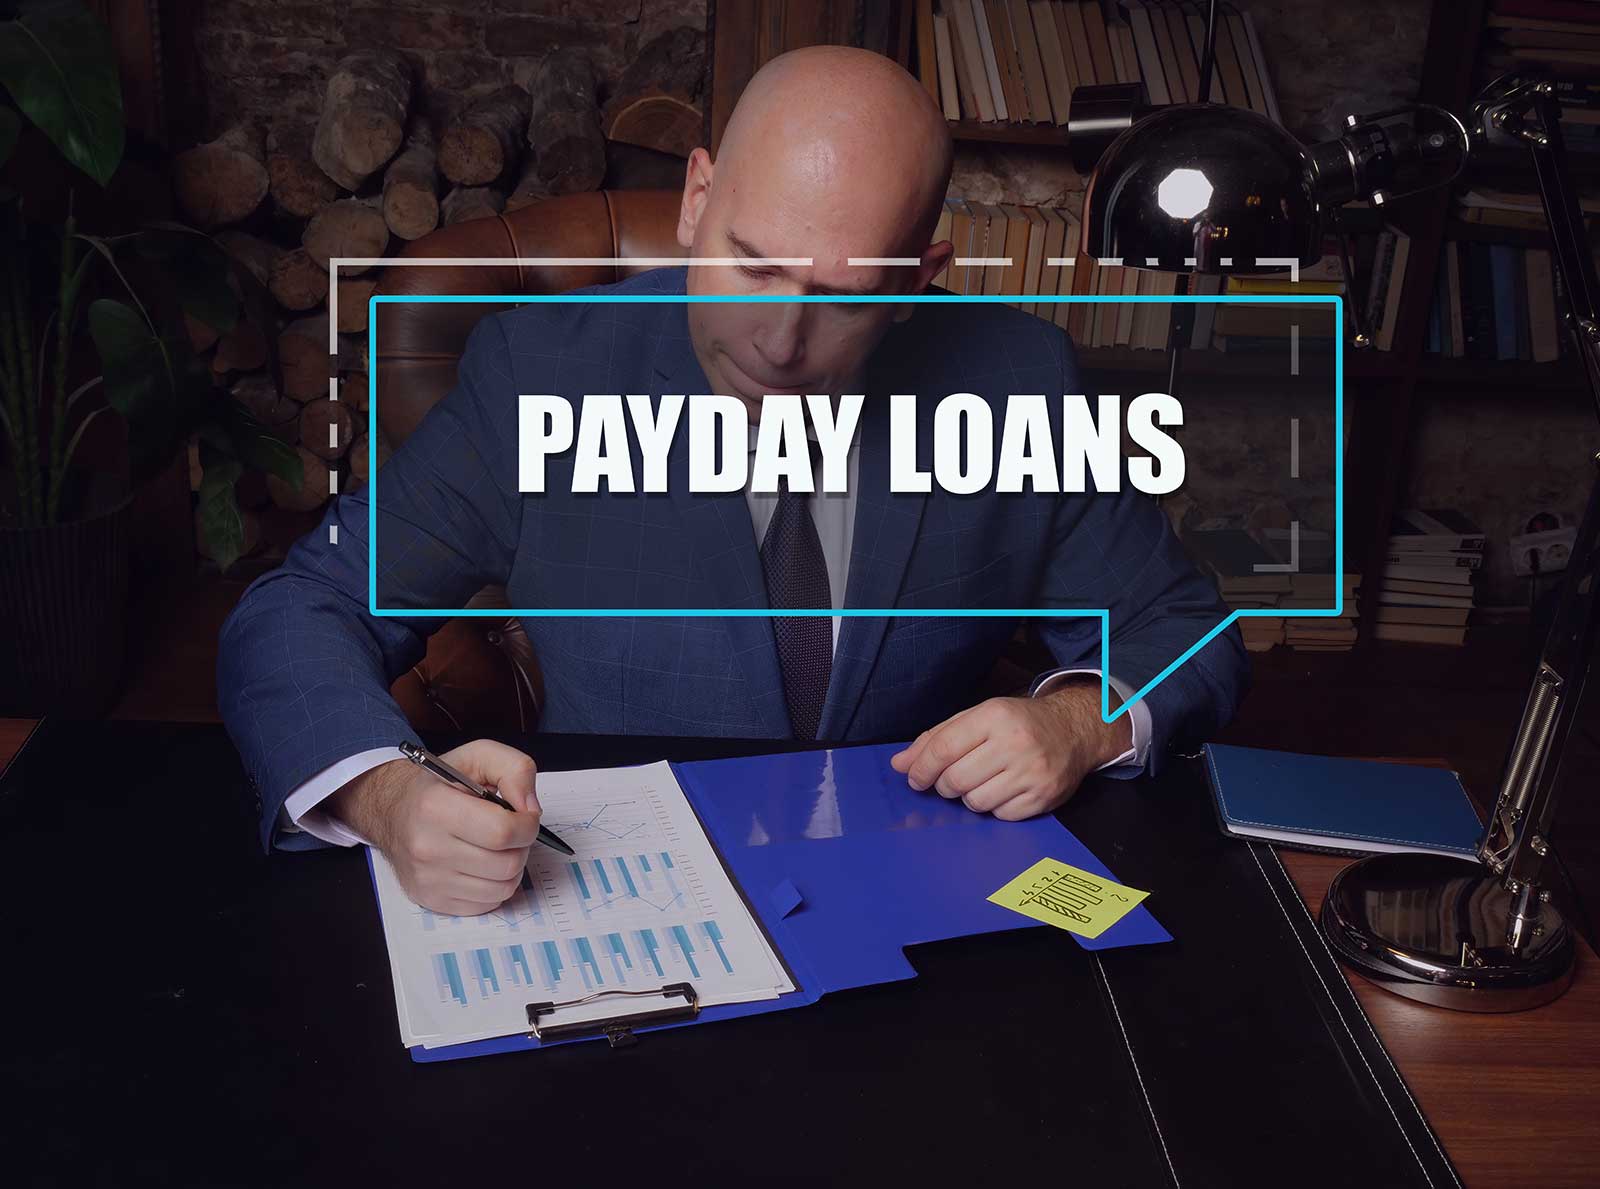 Common Reasons People Use Payday Loans